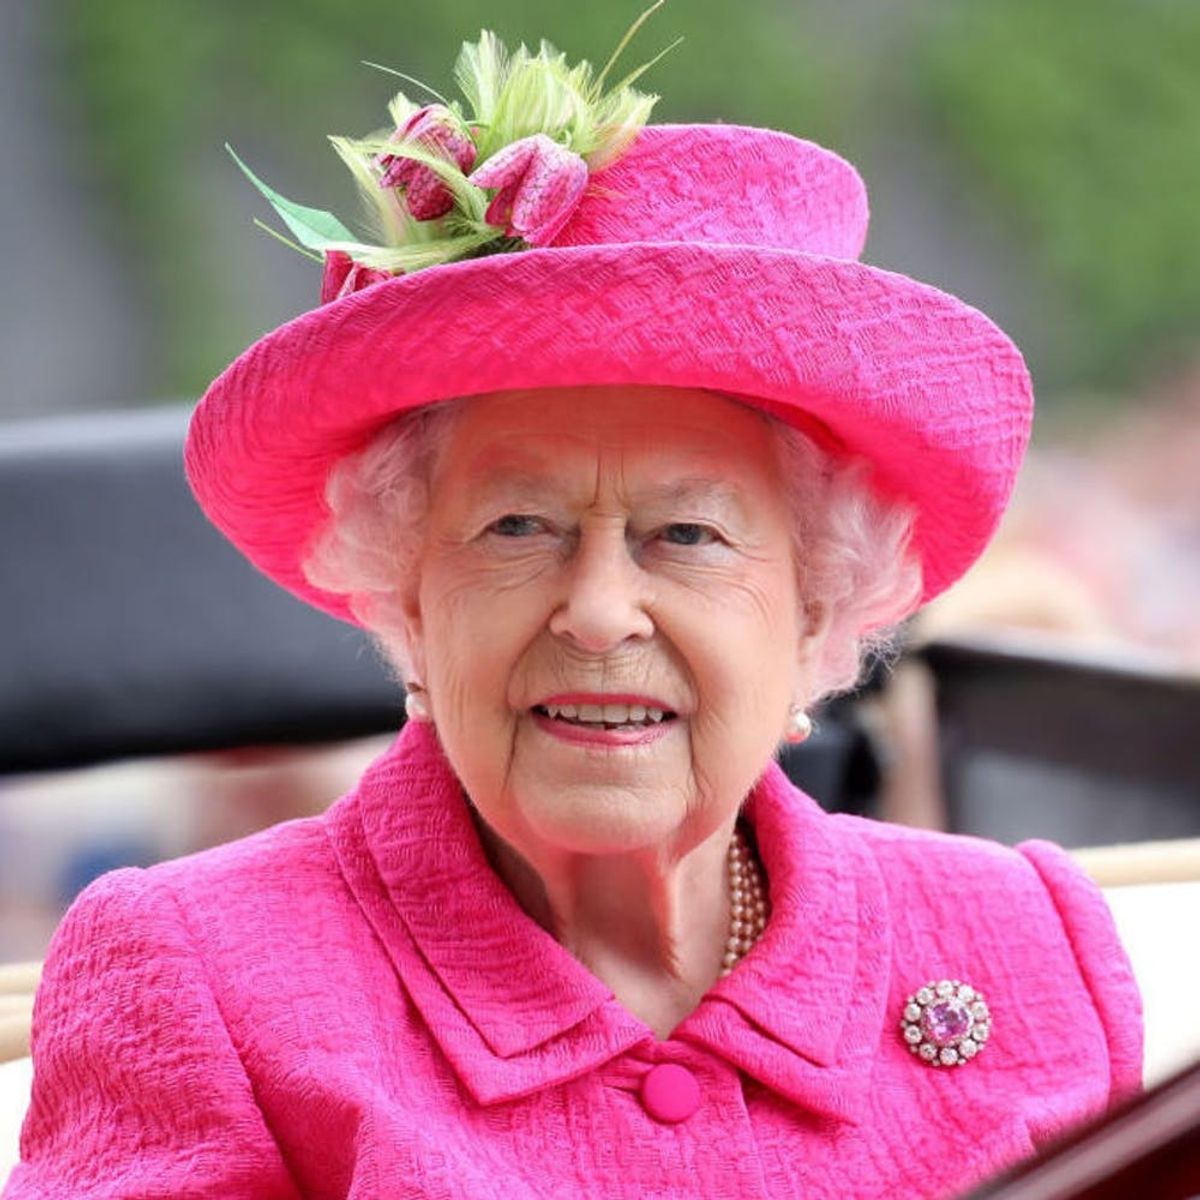 Someone Reported the Queen to Police for Not Wearing a Seatbelt